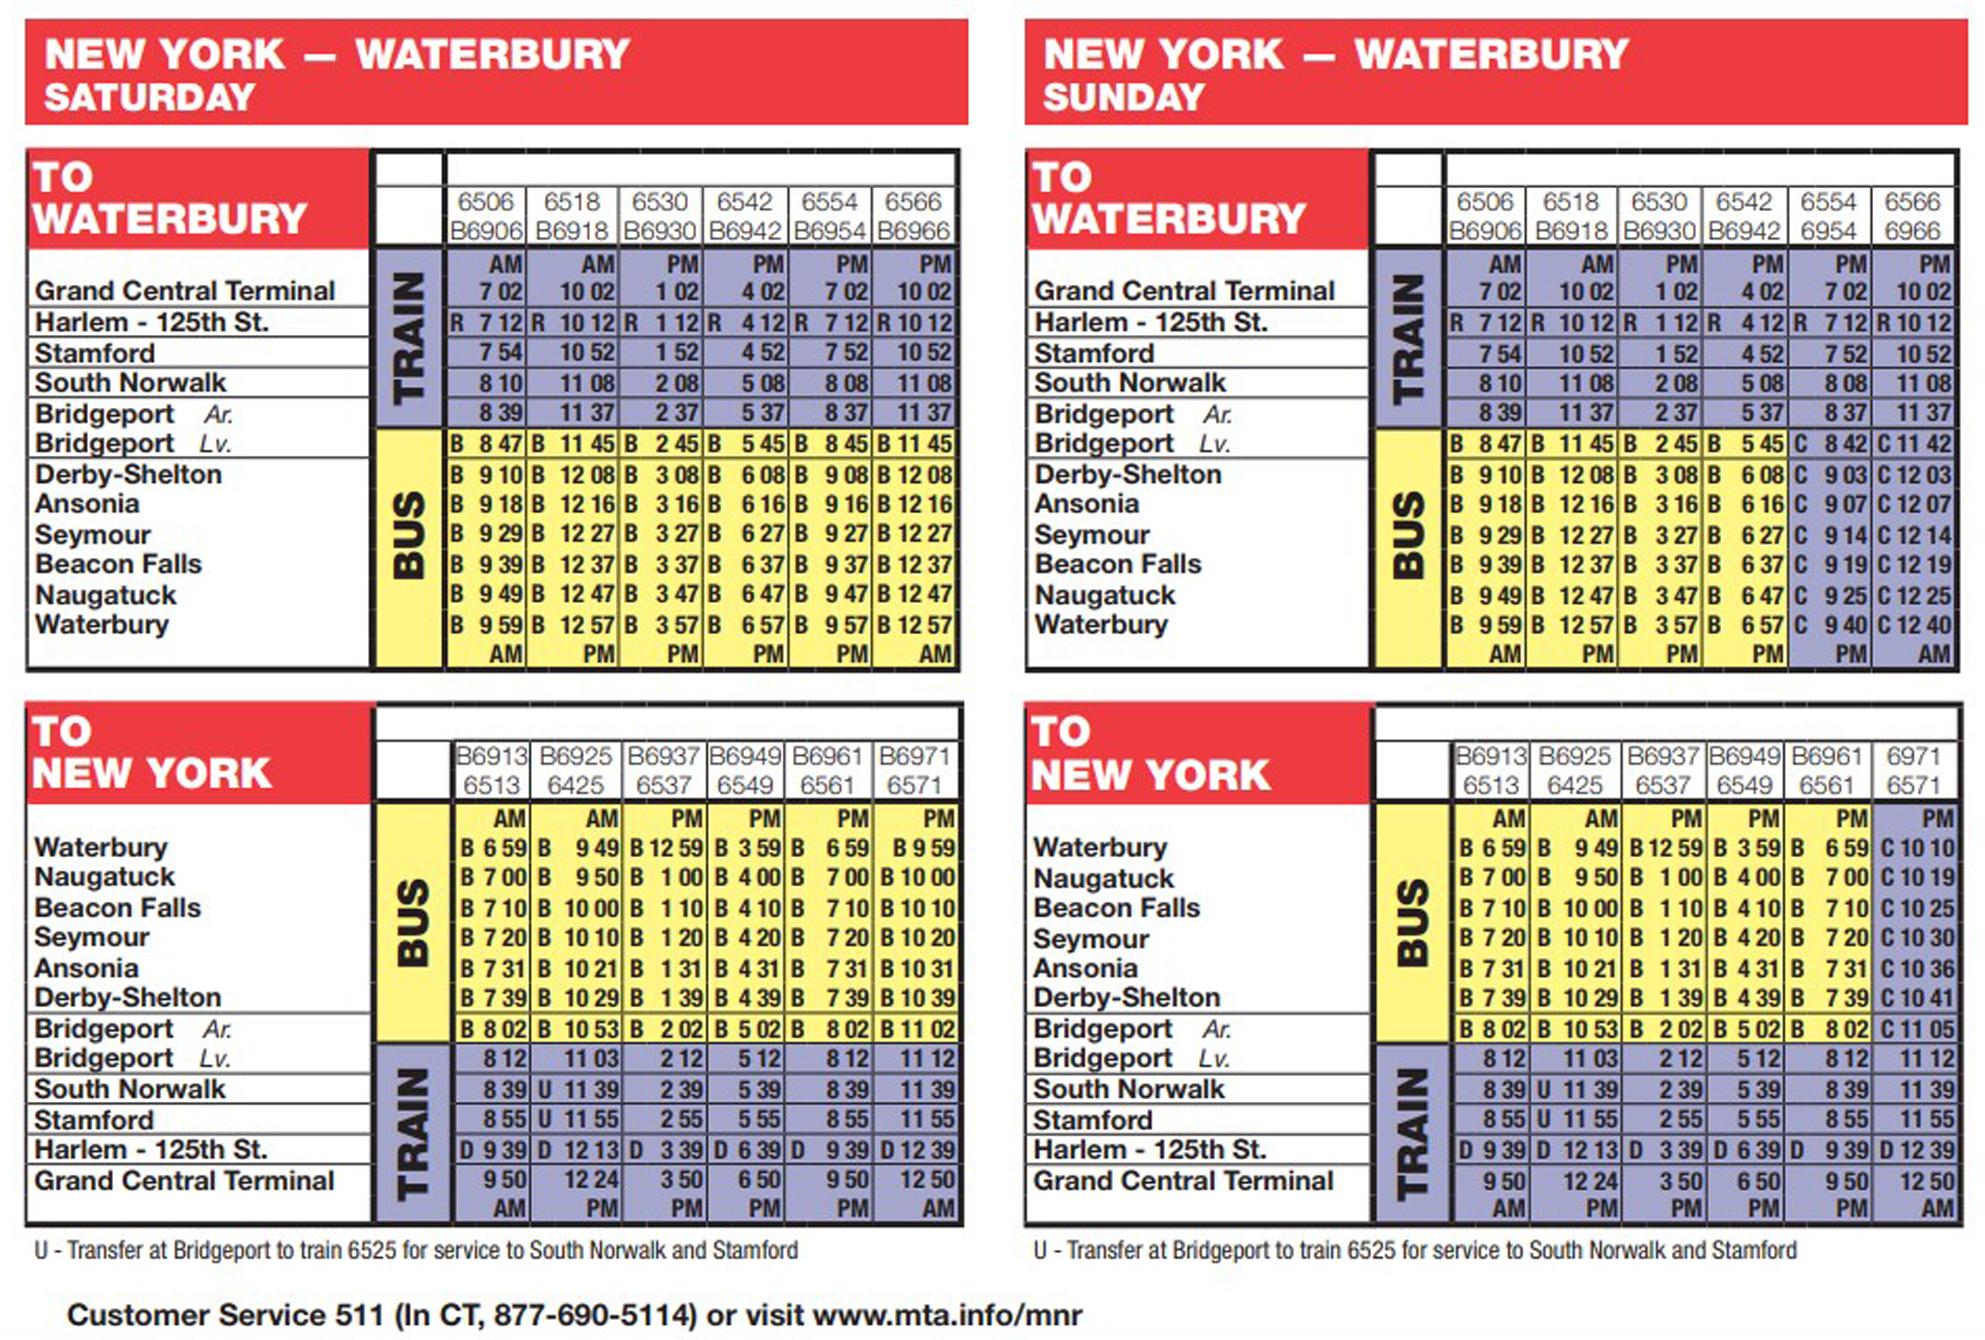 Buses to replace some MetroNorth trains Saturday, Sunday